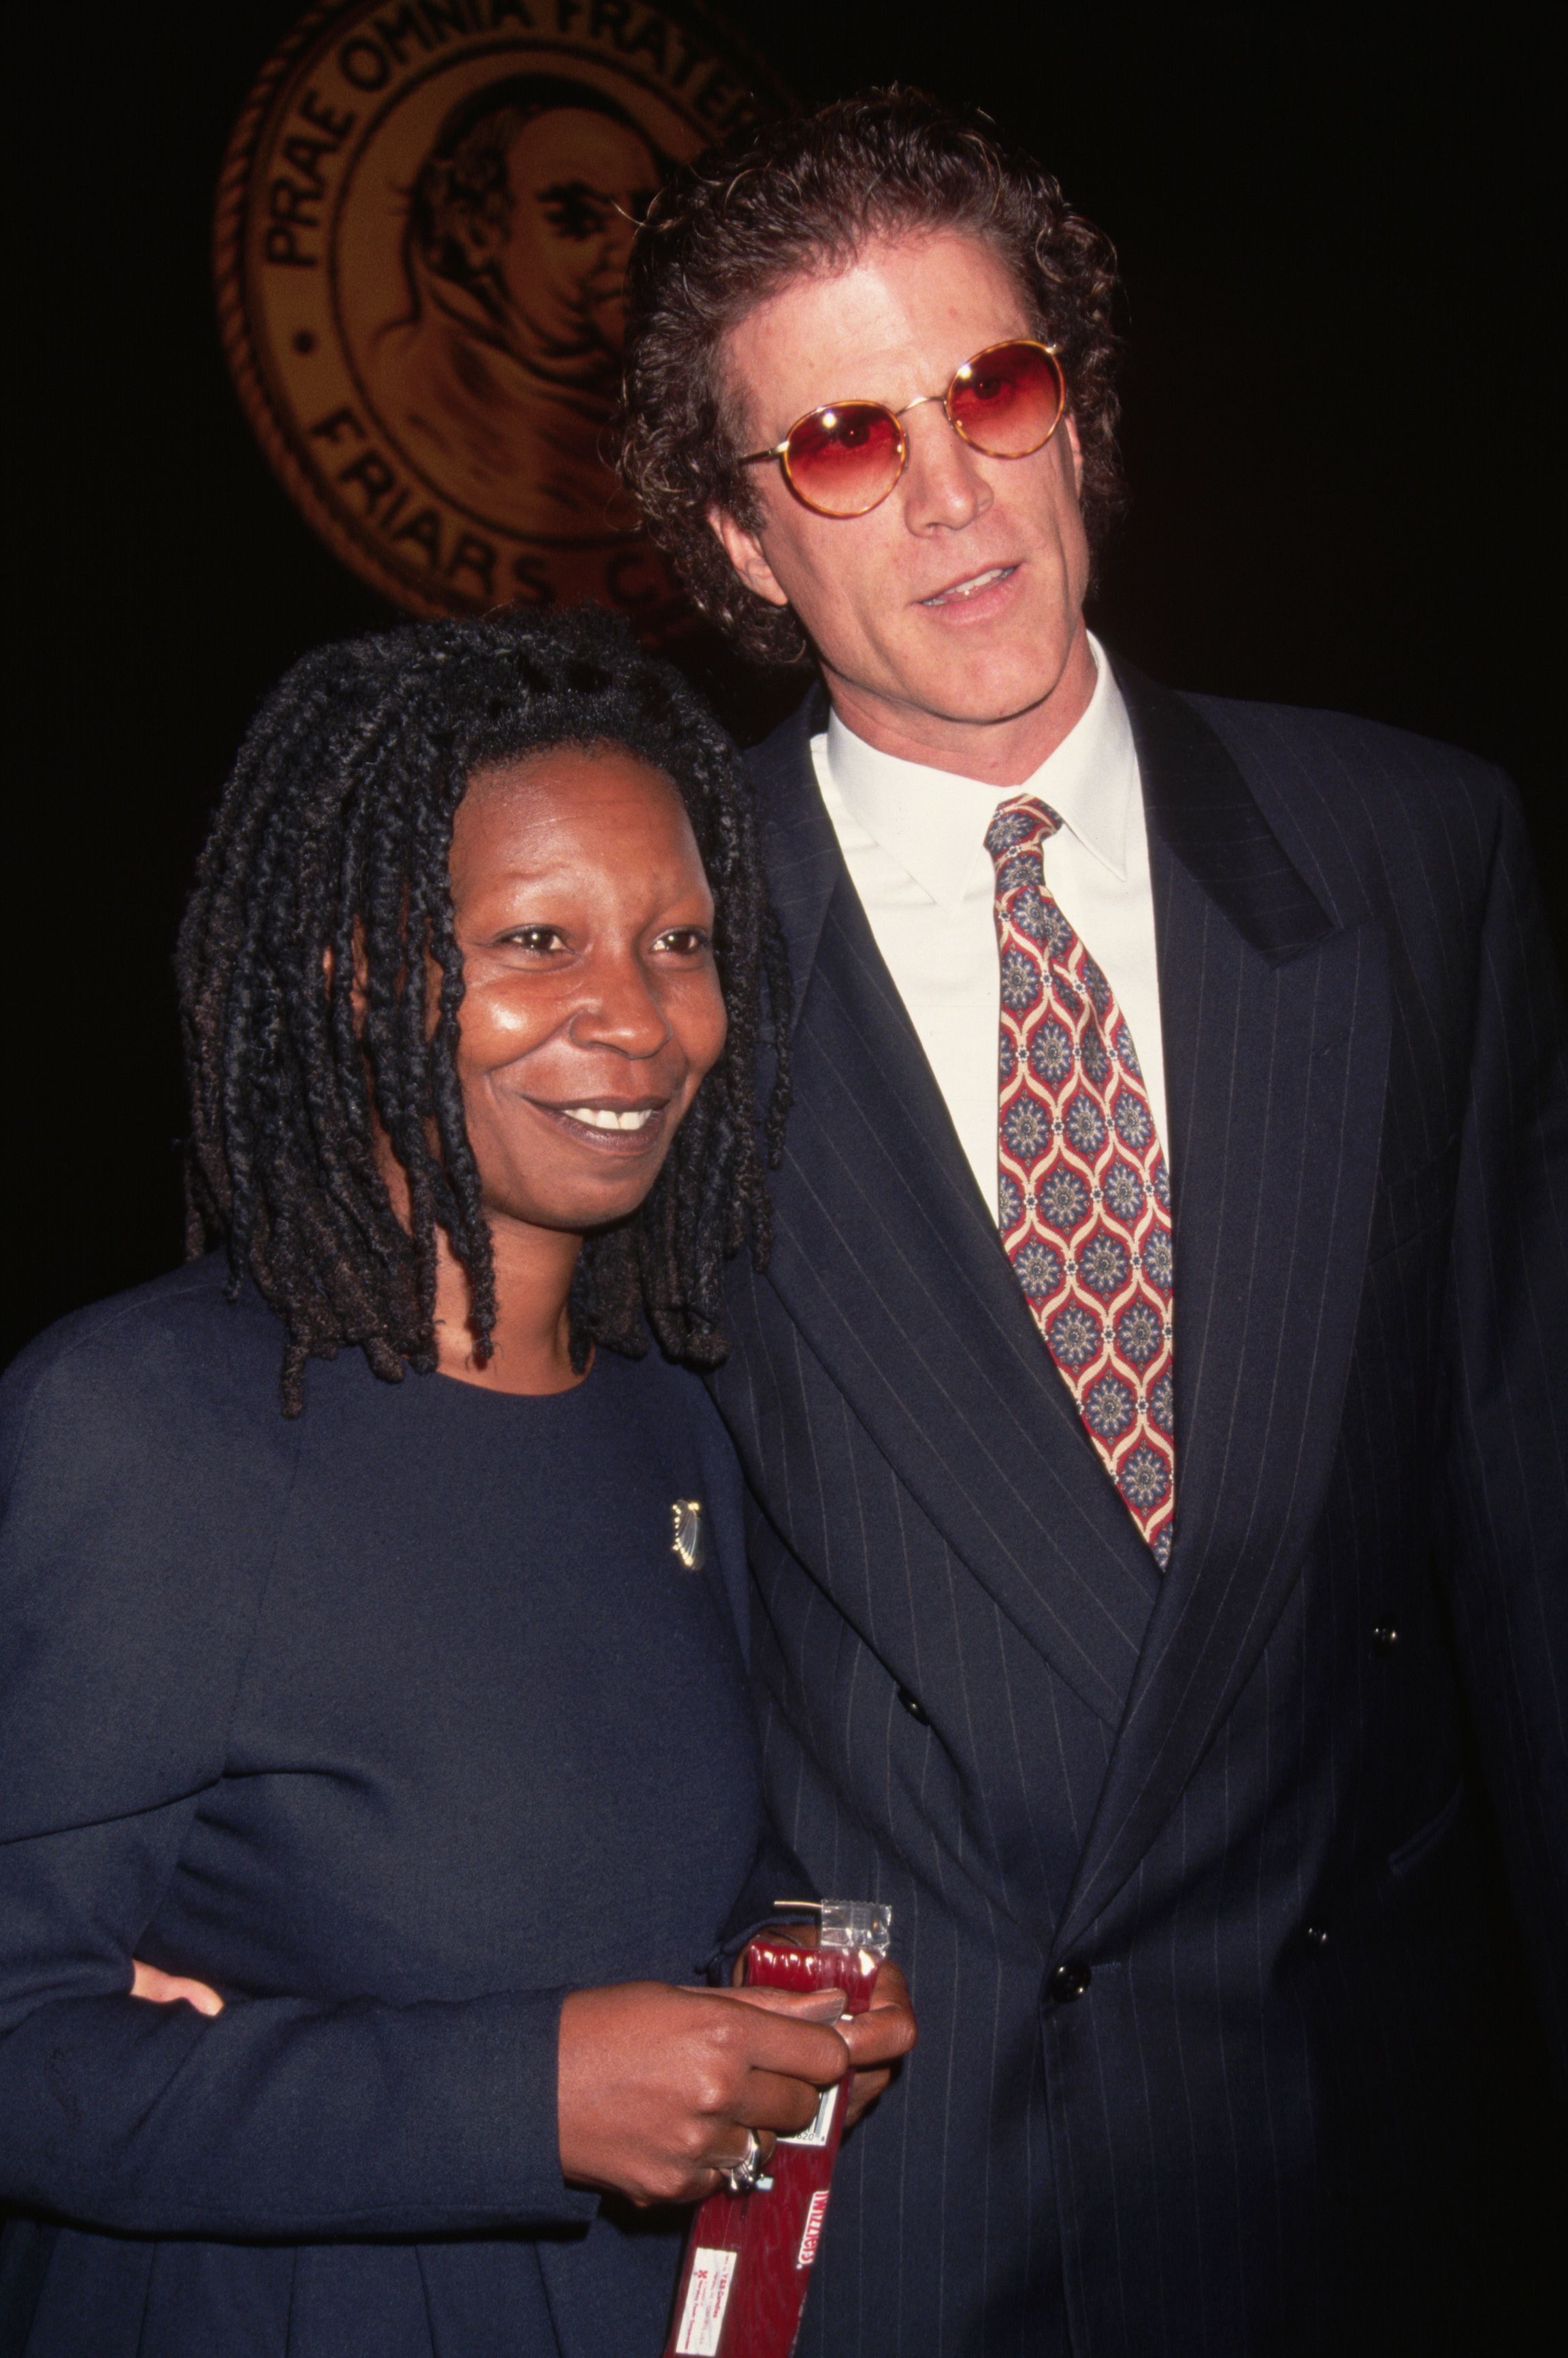 Actress And The View Host Whoopi Goldberg Has Been Married Three Times